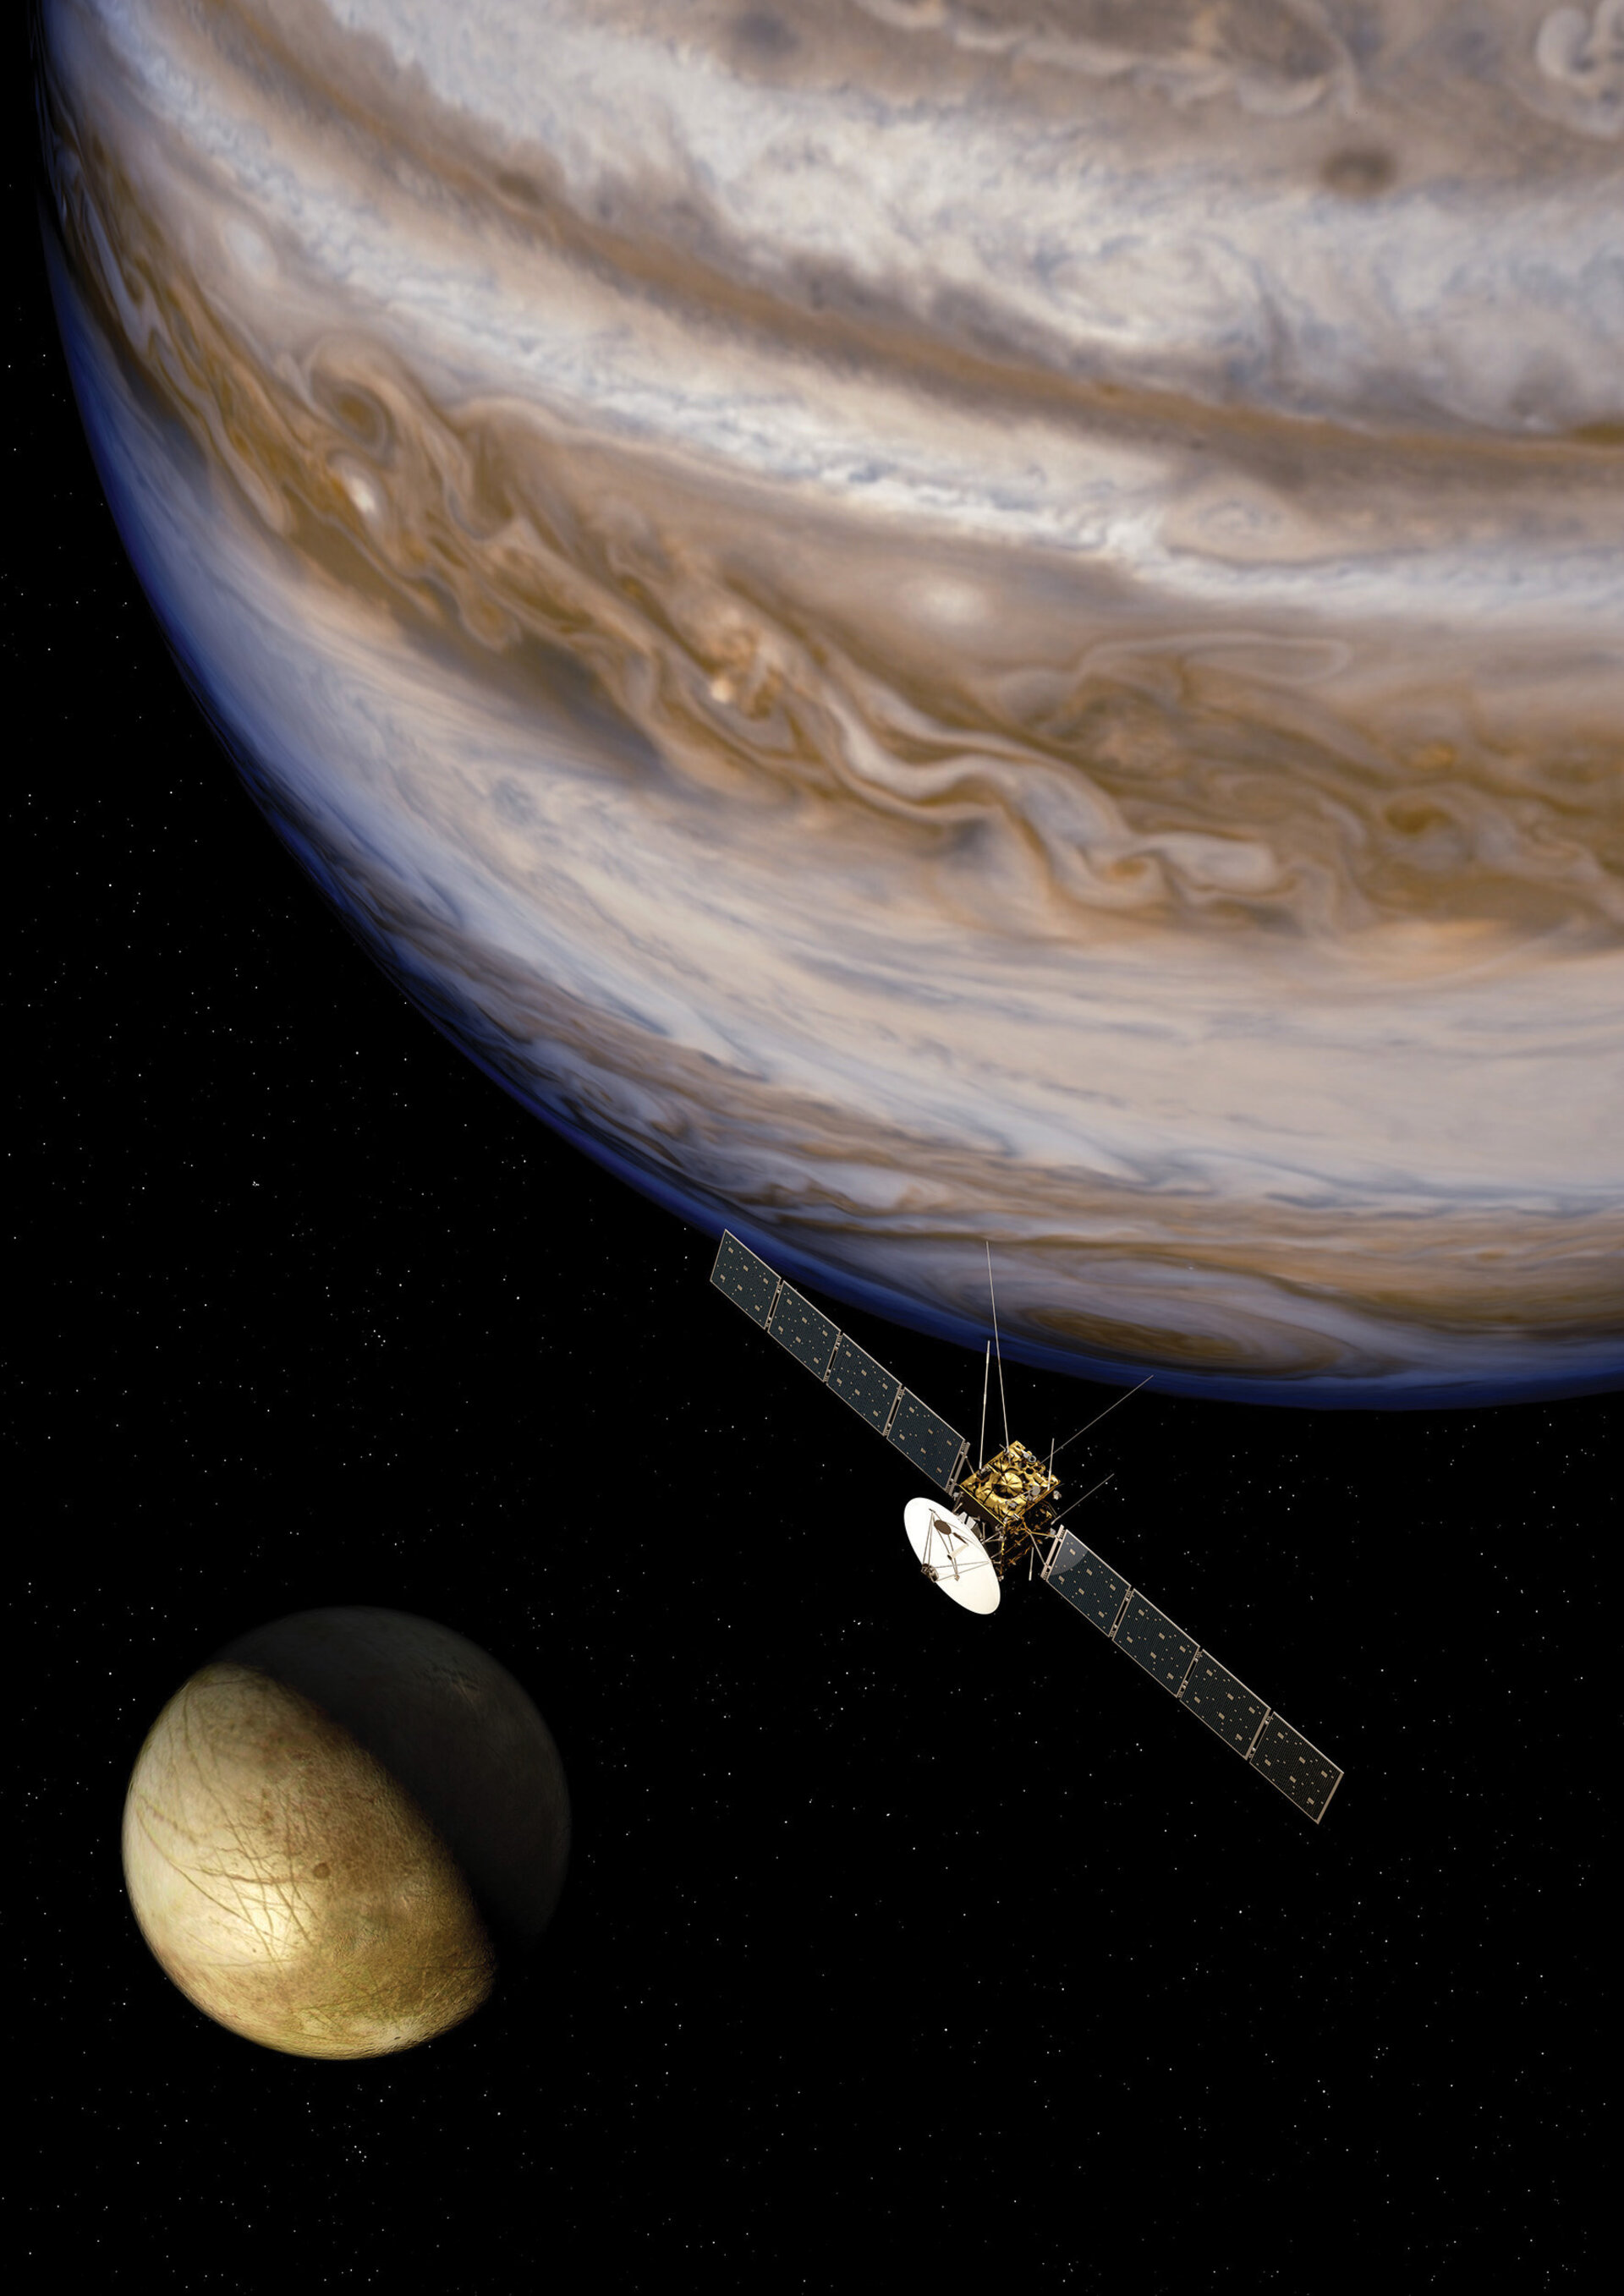 Europe’s first mission to the Jupiter system